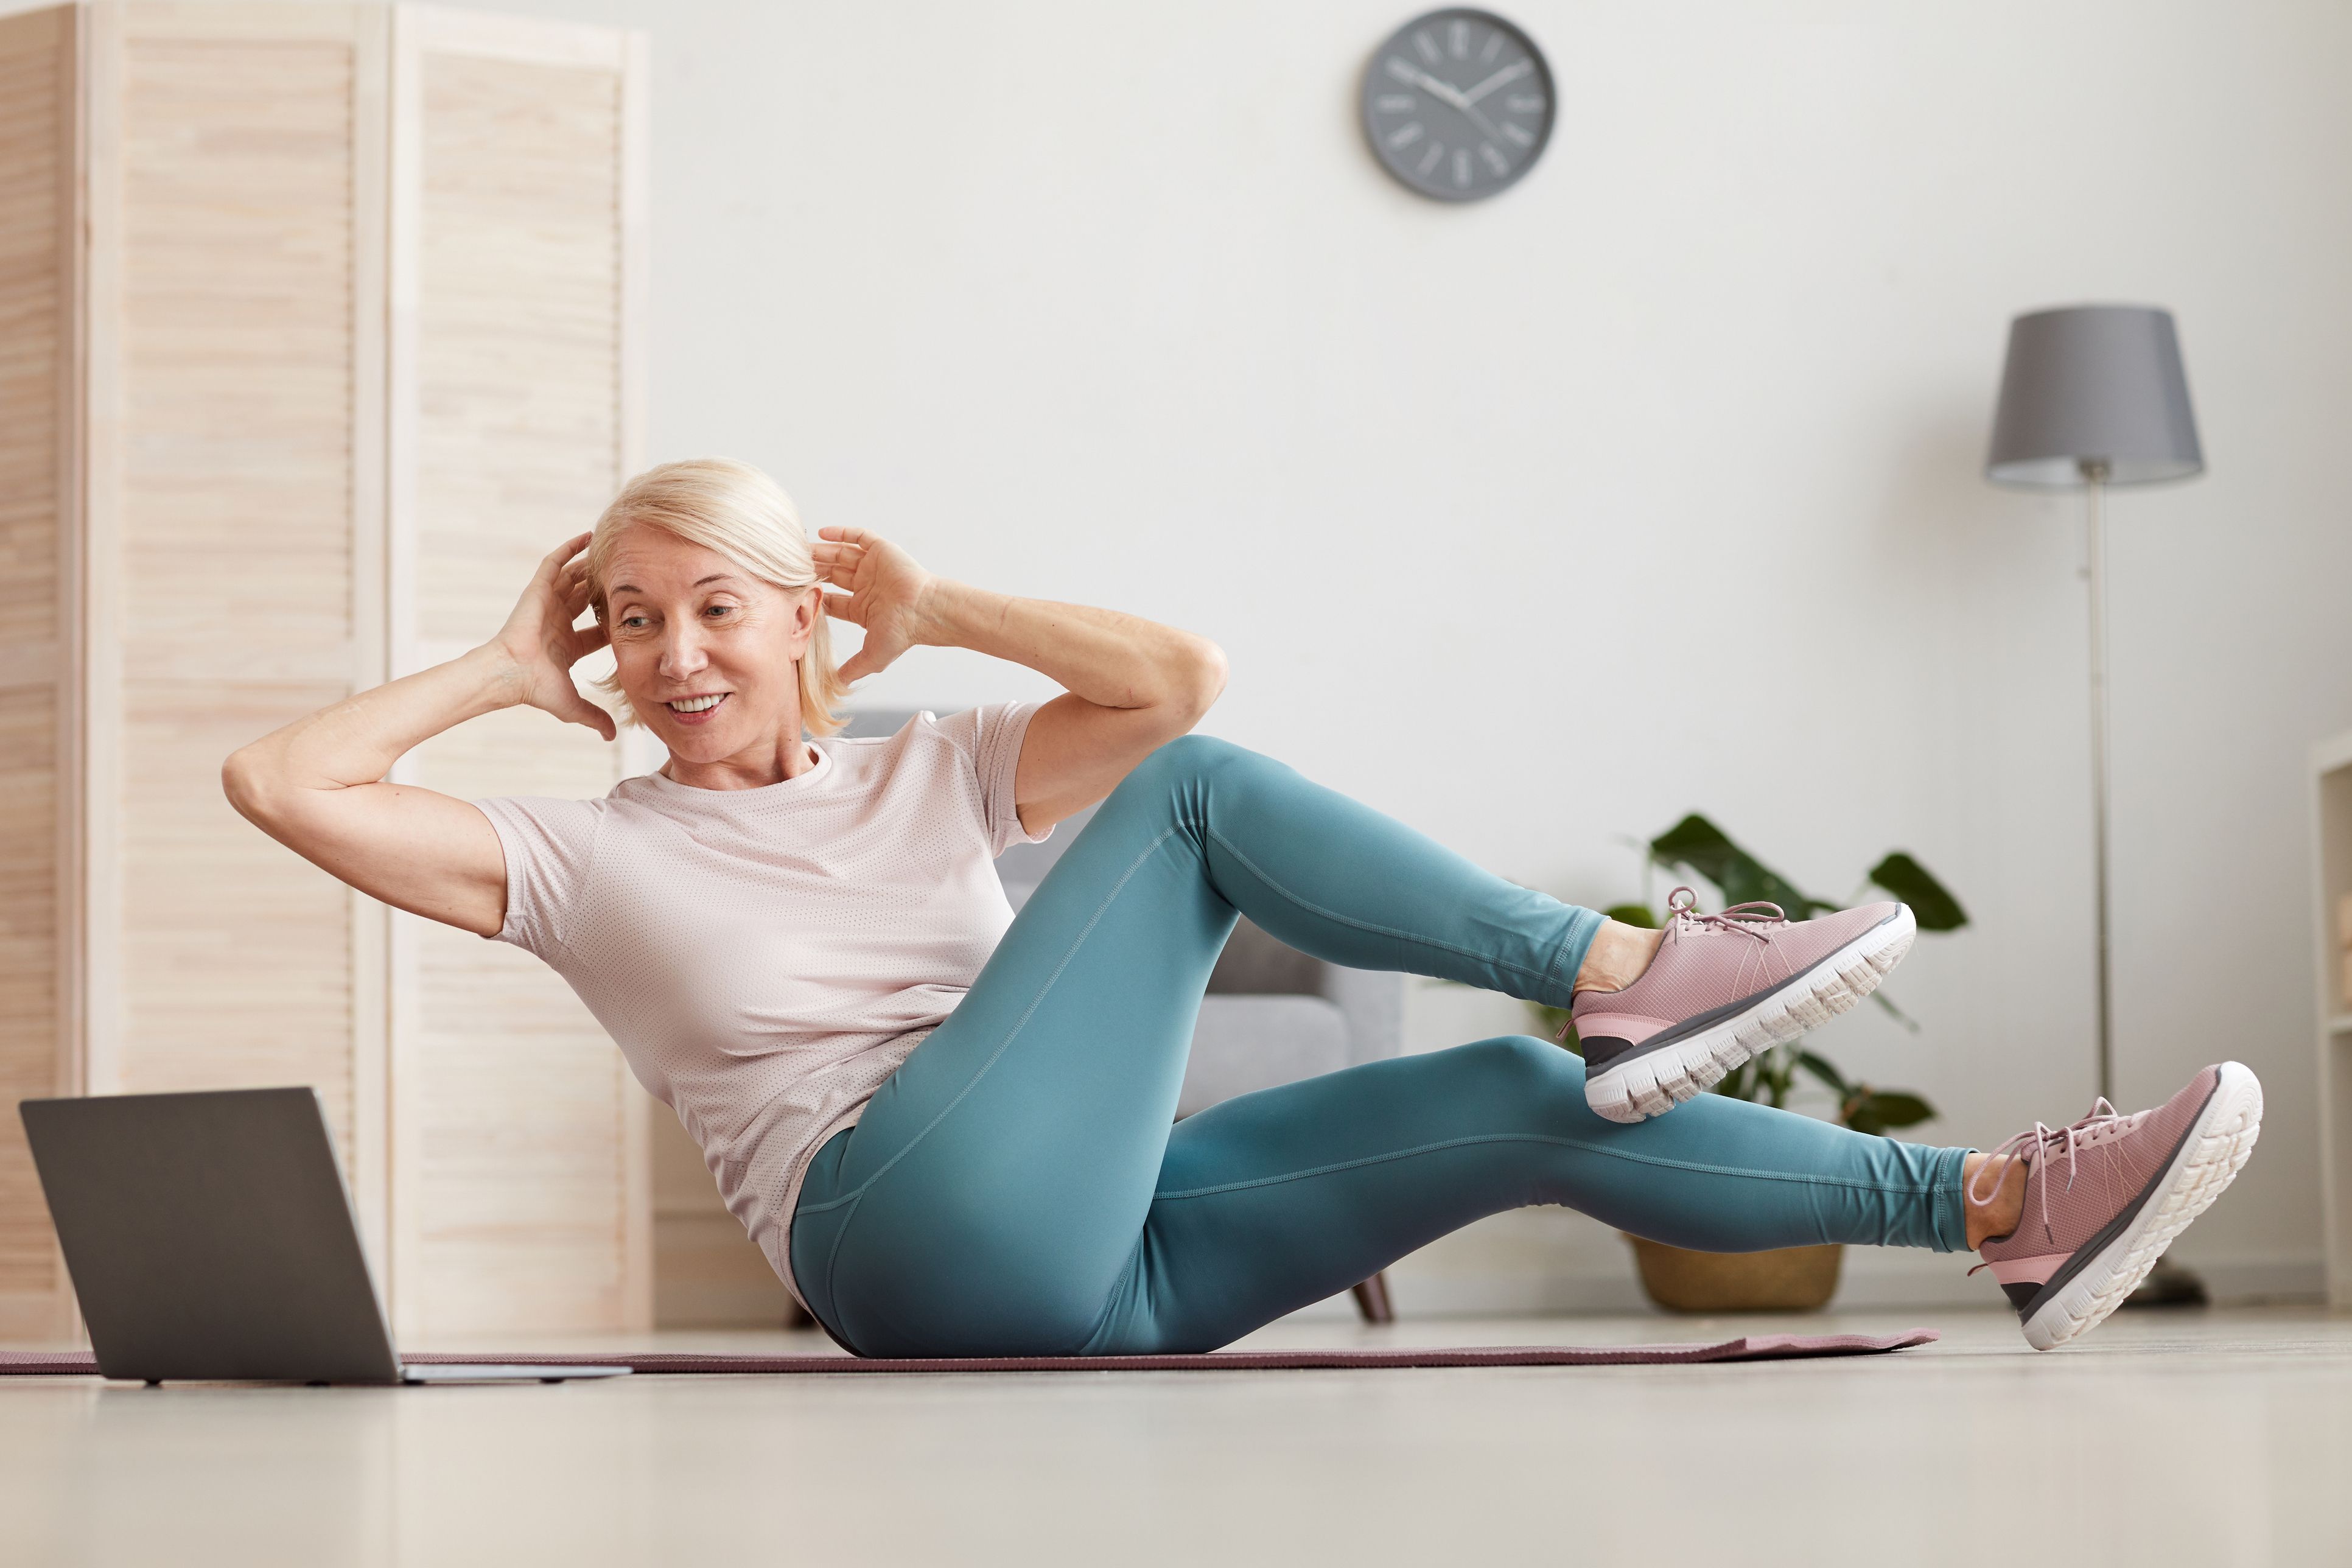 Exercising Videos & Games for Joint Pain